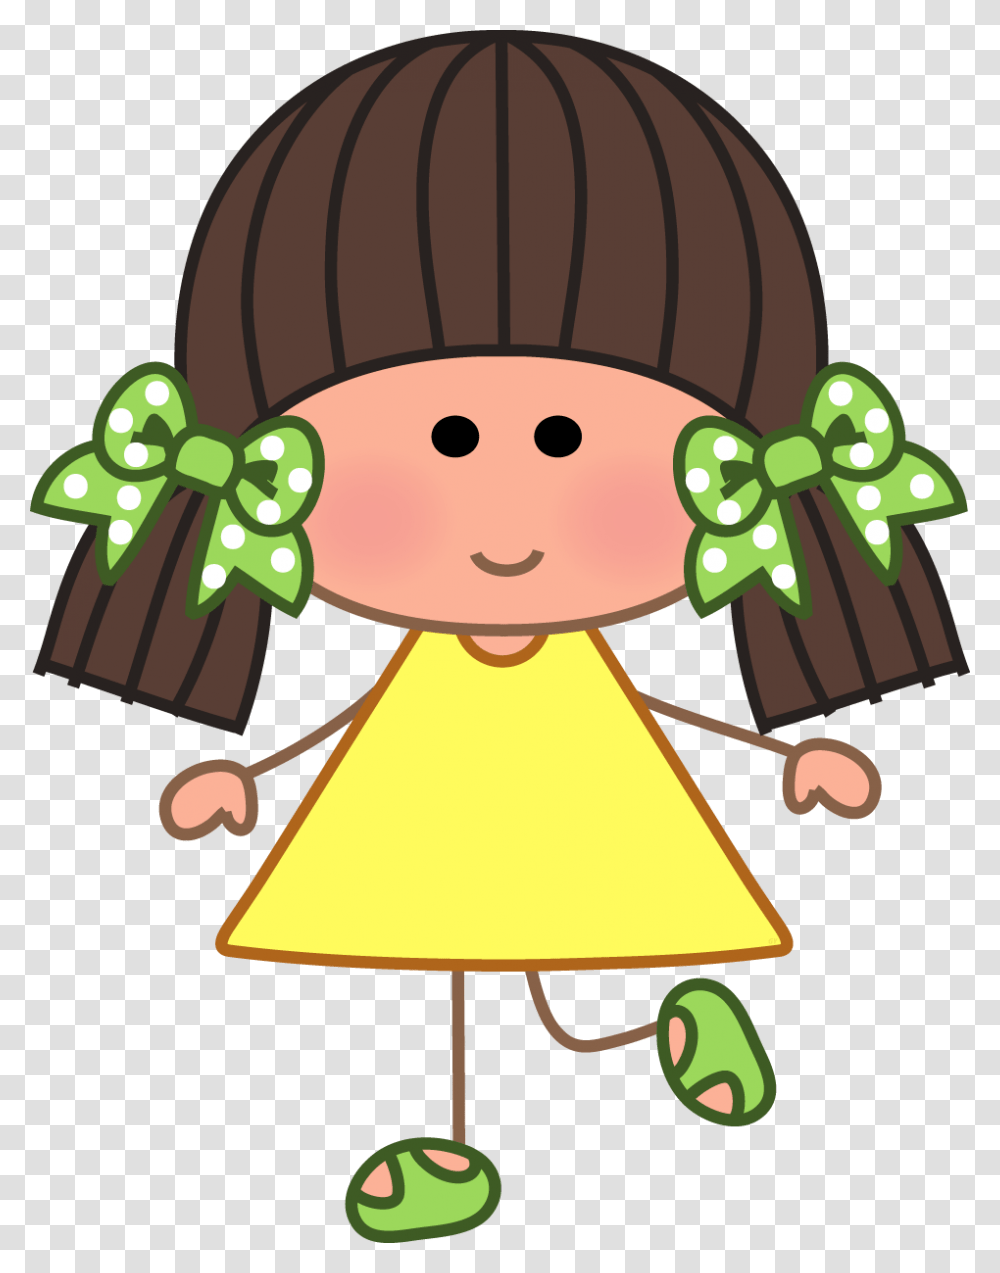 Nena Yellow Art Girl Clip Art And Drawings, Lamp, Plant, Elf, Doll Transparent Png